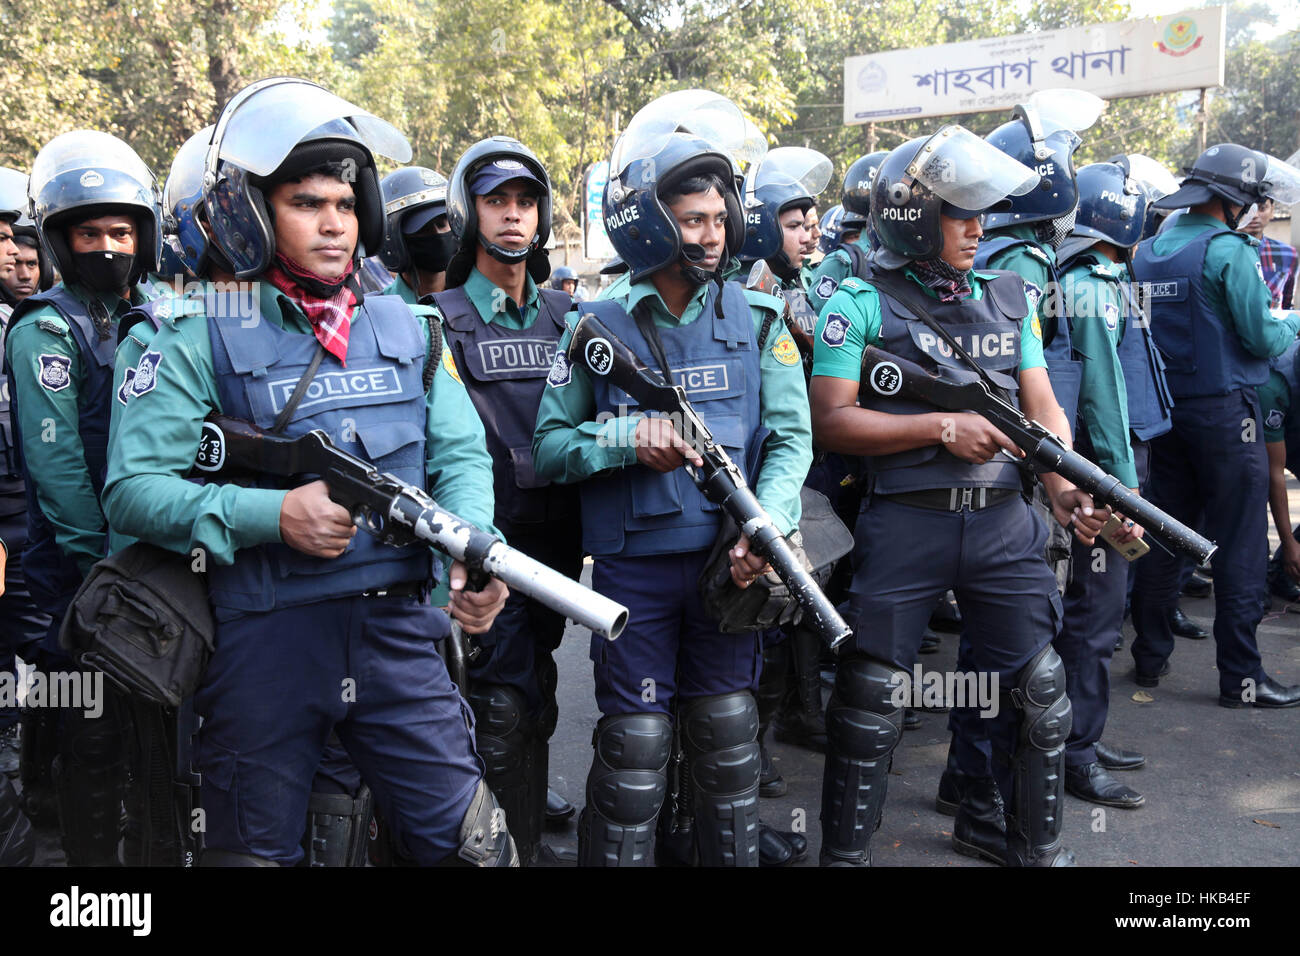 Dhaka, Bangladesh. 26th Jan, 2017. Bangladeshi police ready to fired tear gas to disperse activists during a strike to protest the construction of a coal-fired power plant. Clashes erupte as police fired tear gas at hundreds of campaigners protesting against a massive coal-fired power plant they say will destroy the world's largest mangrove forest. Witnesses said Shahbagh Square, Dhaka's main protest venue, turned into a battleground as police used water cannon and fired tear gas and rubber bullets at hundreds of left-wing and environmental protesters. © Monirul Alam (Credit Image: © Moni Stock Photo